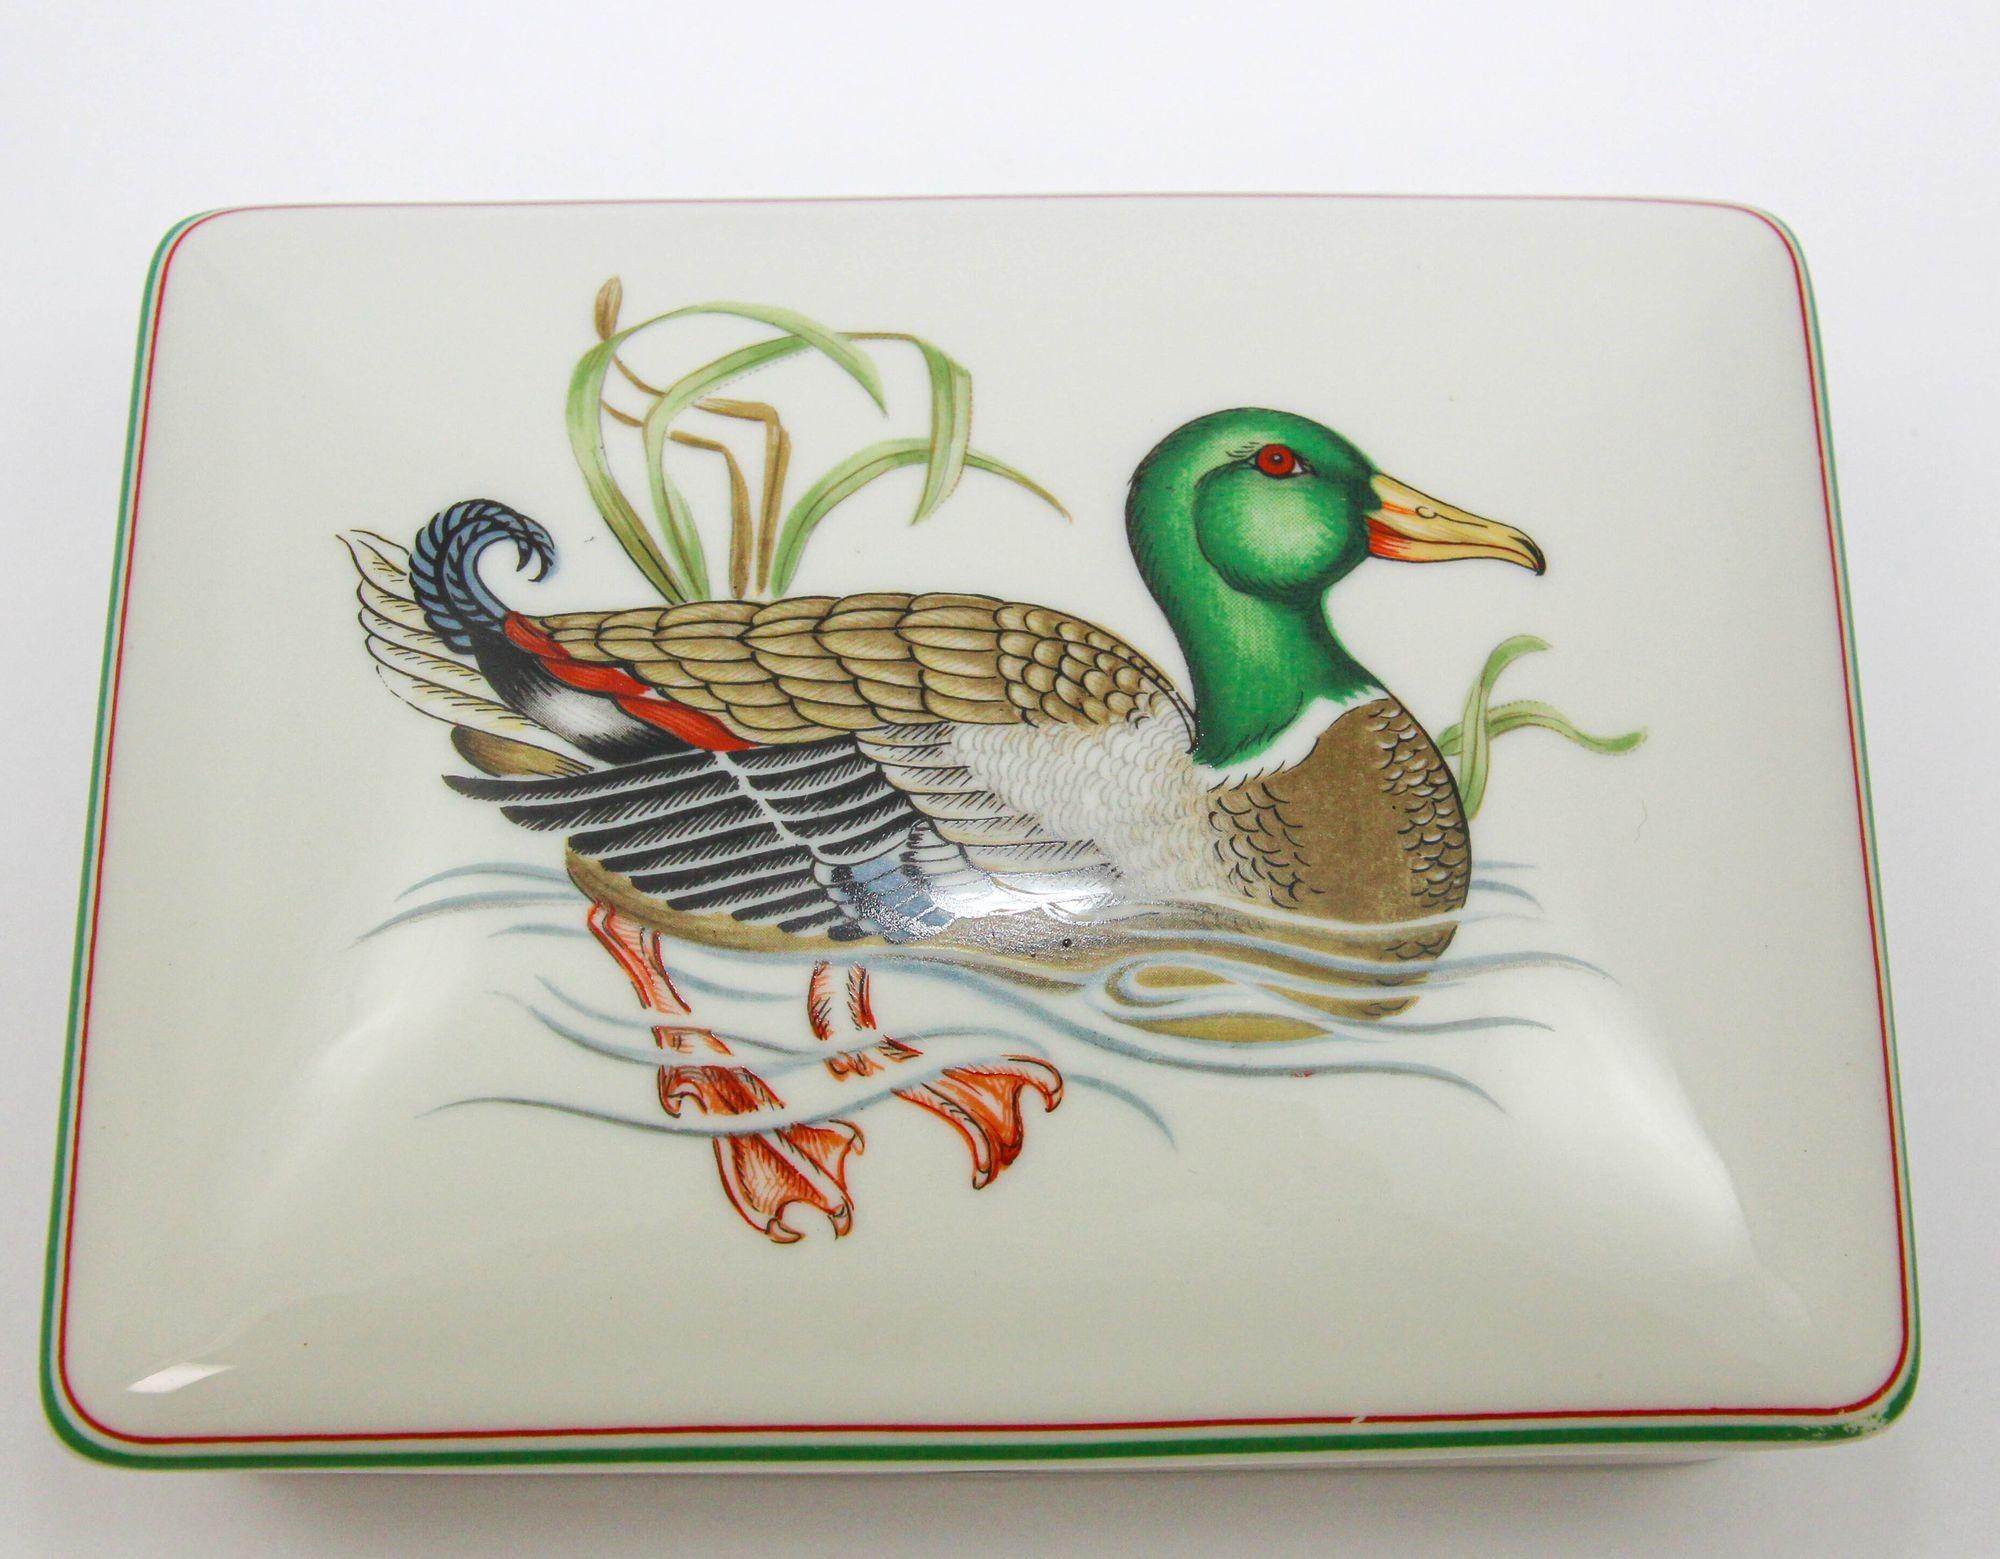 Fitz and Floyd Porcelain Box with Bridge Playing Cards 1980 Japan For Sale 2